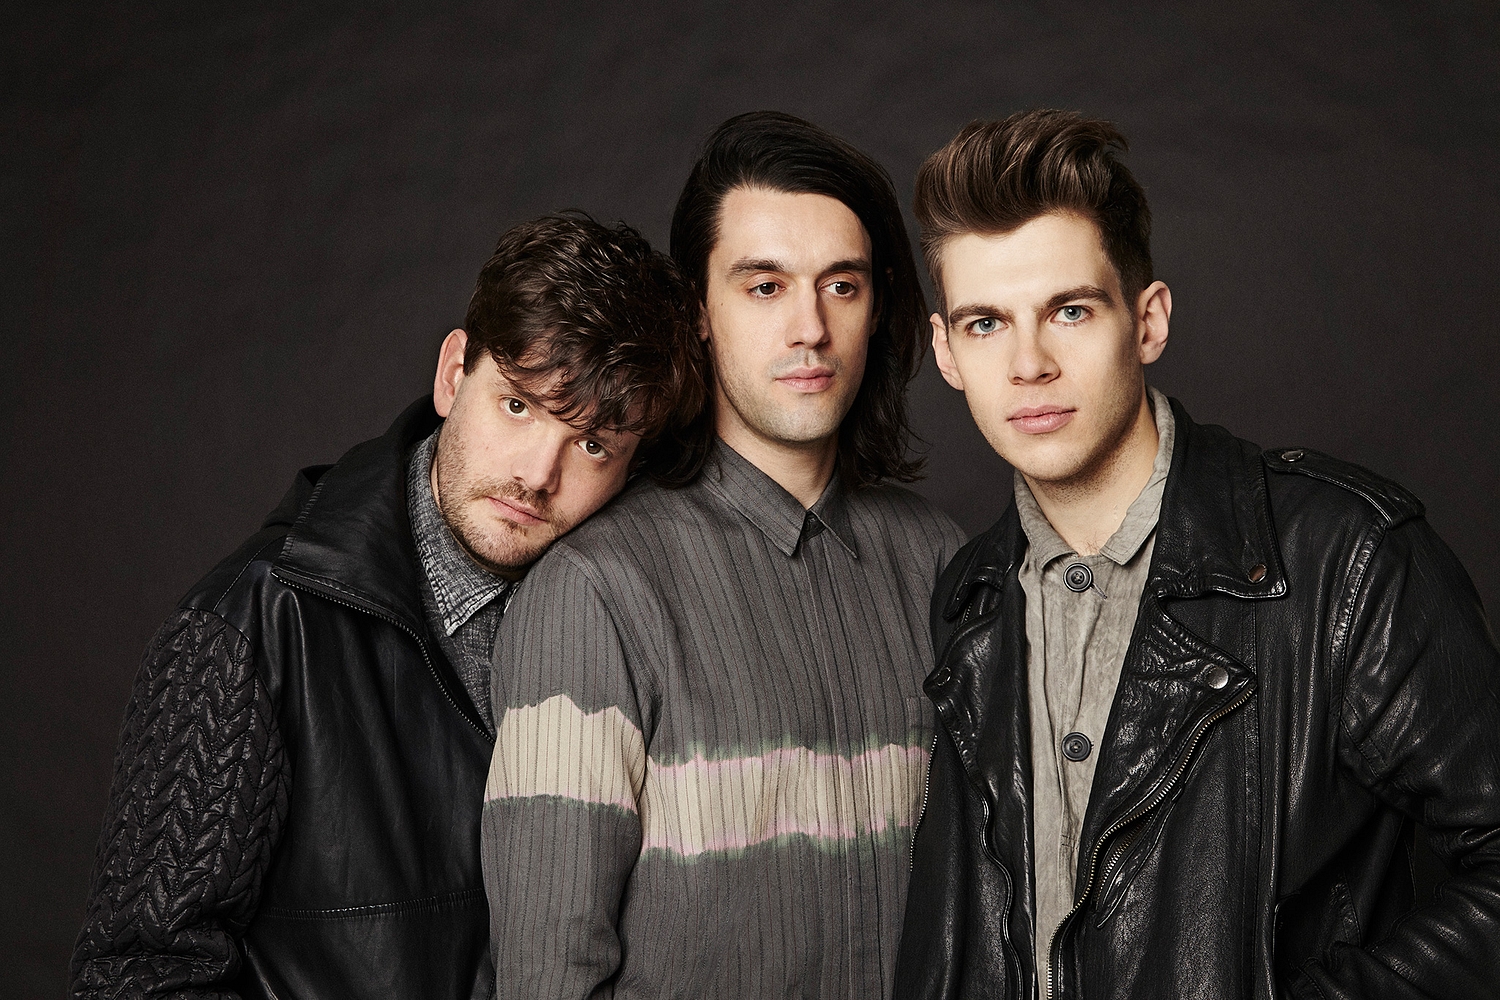 Klaxons: "We’re a pop group trying to make hits for the radio, and it’s working”